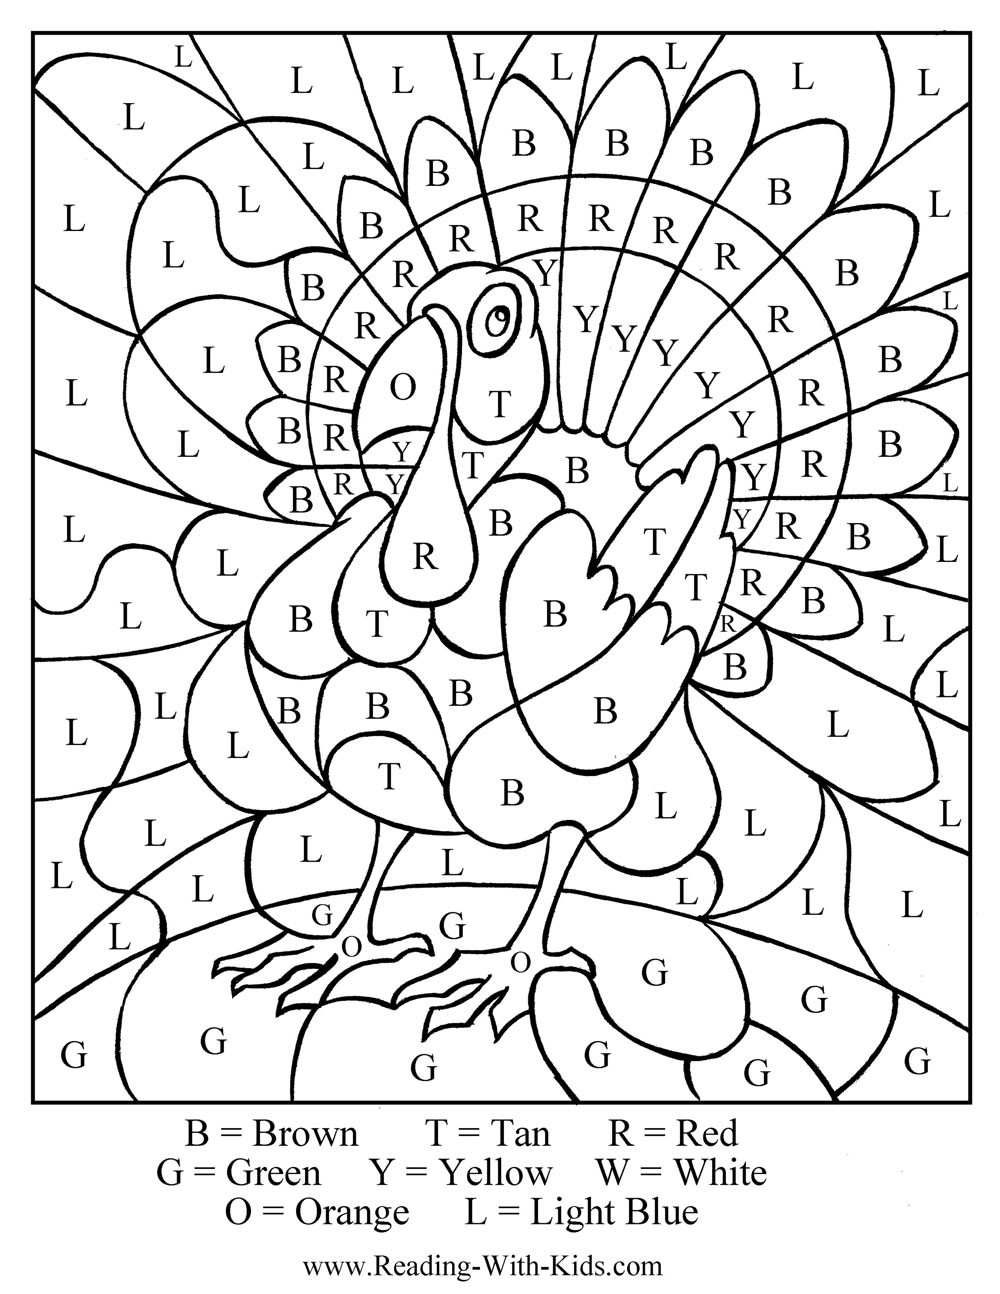 Thanksgiving Coloring Sheets For Kids
 Thanksgiving Coloring Pages